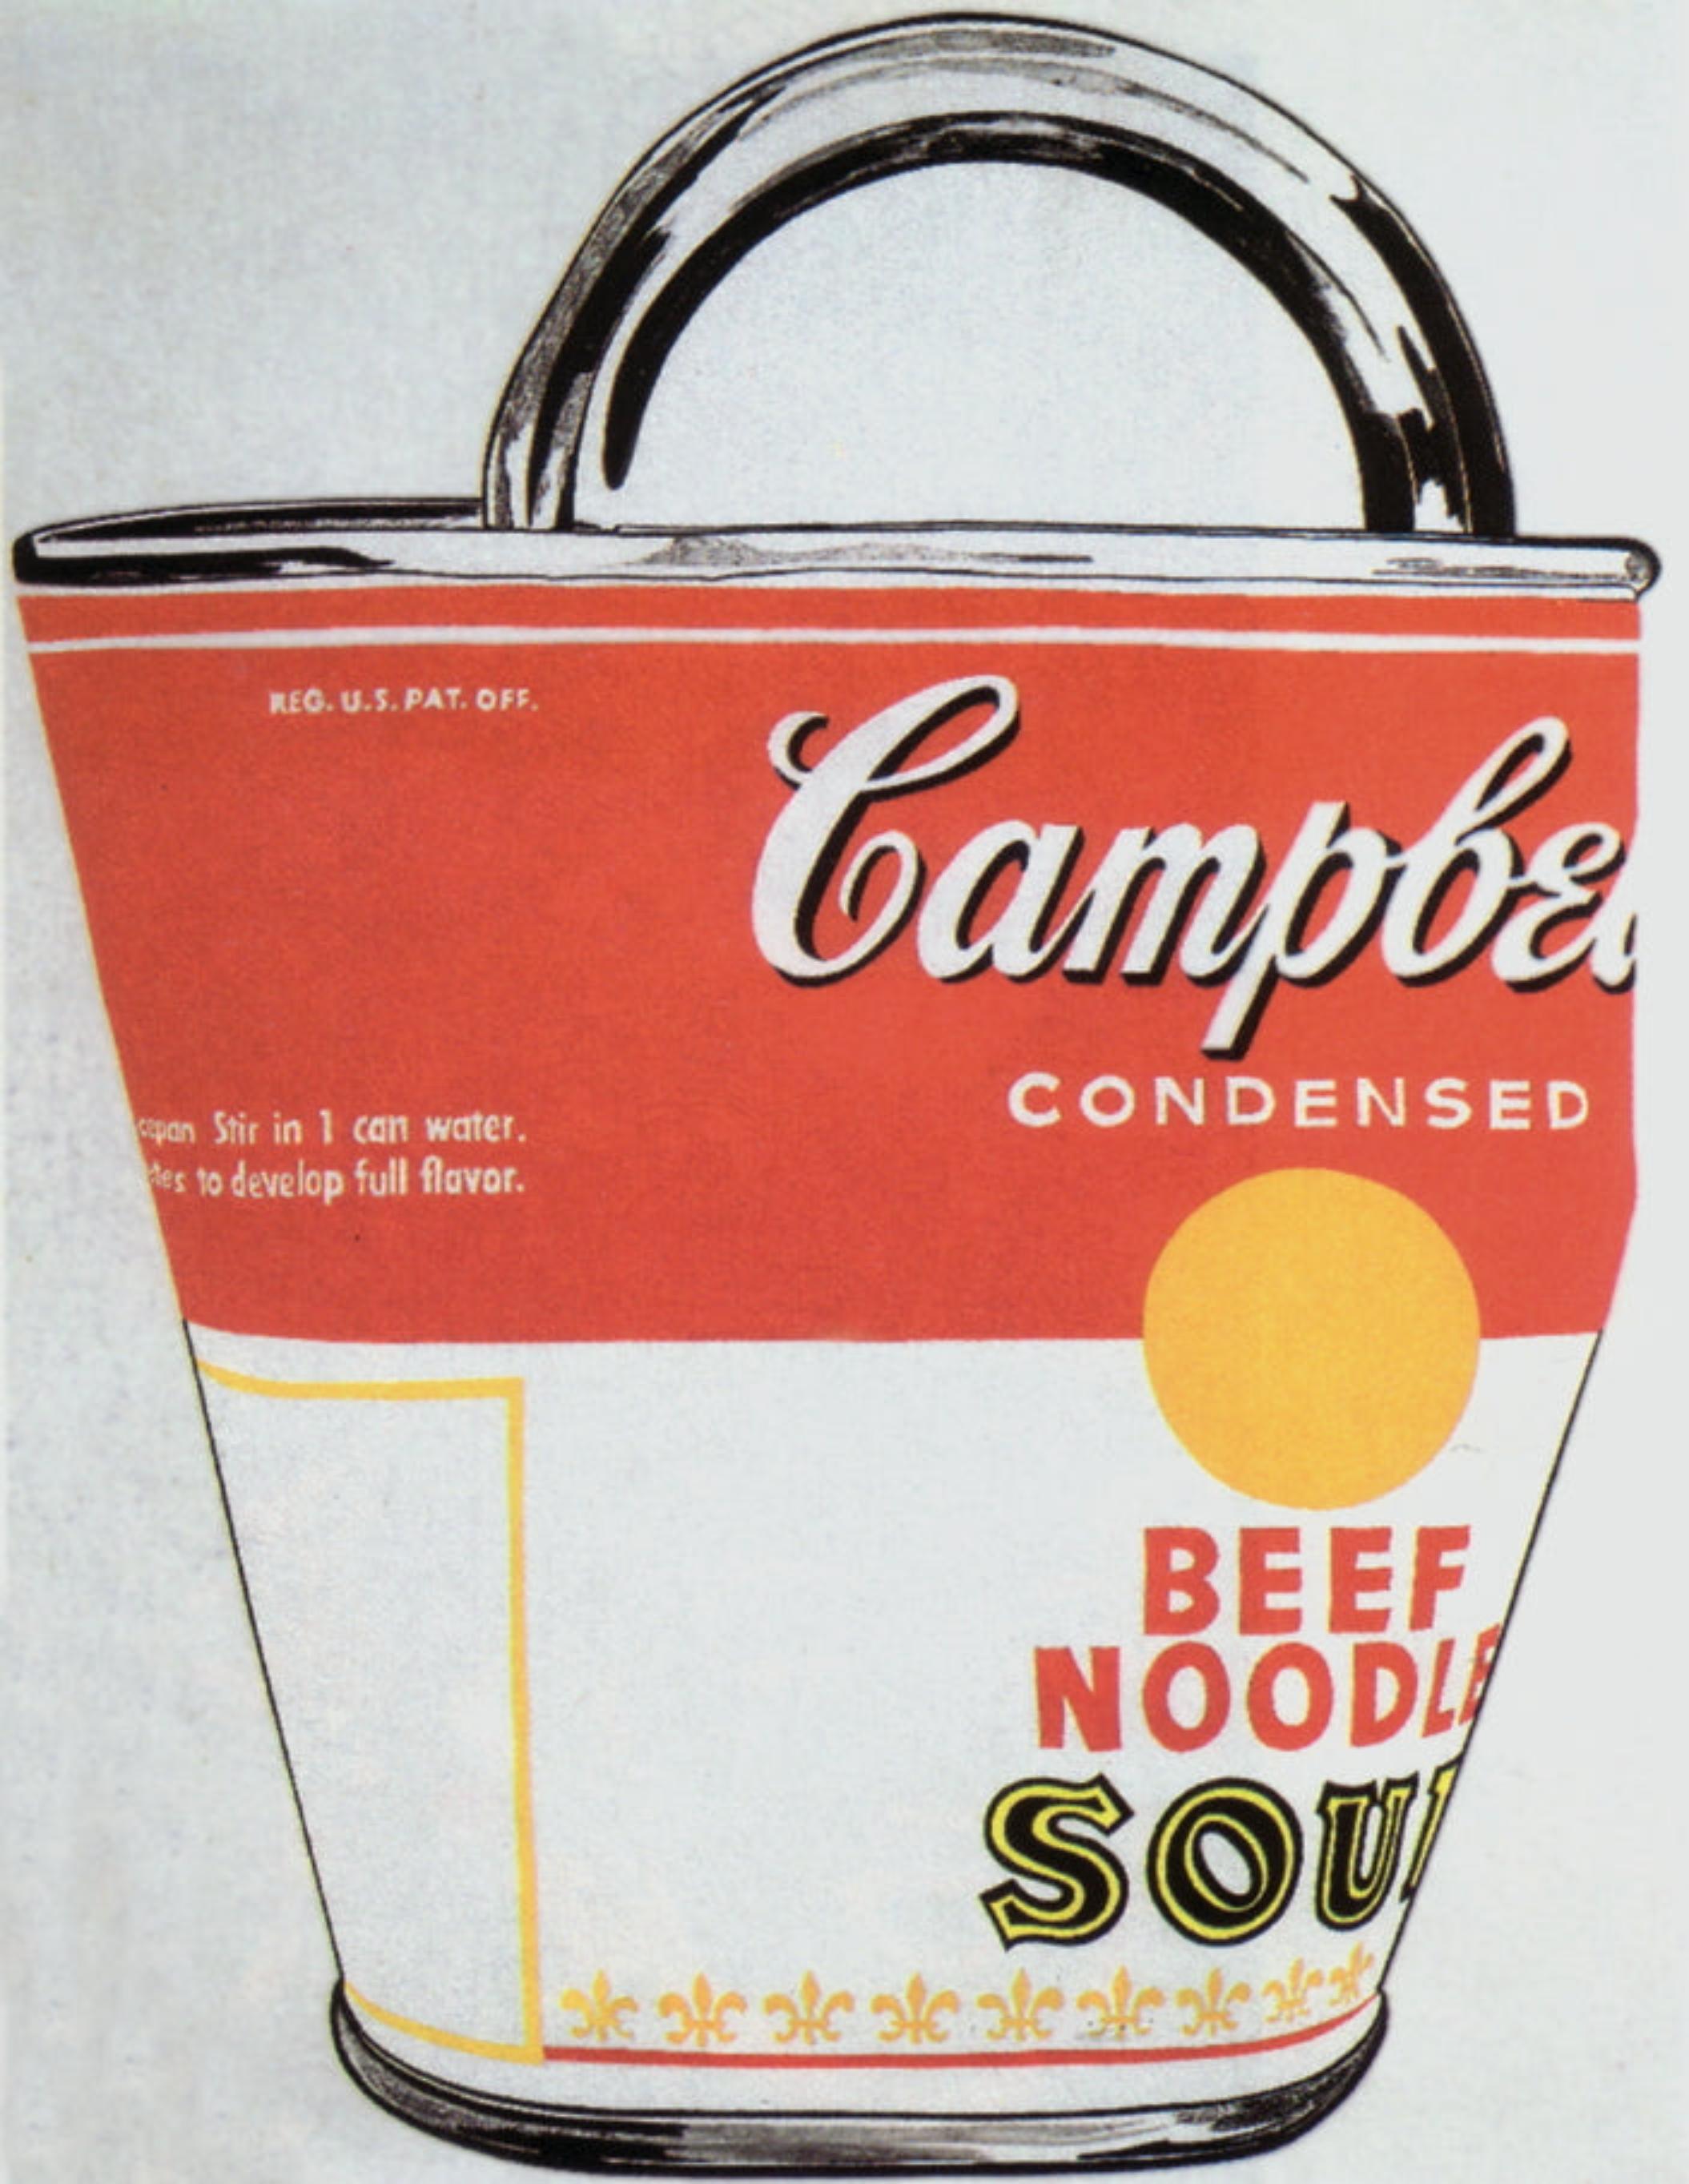 Paper Size: 30.25 x 23.5 inches ( 76.835 x 59.69 cm )
Image Size: 30.25 x 23.5 inches ( 76.835 x 59.69 cm )
Framed: No
Condition: A: Mint

Additional Details: Soup Can bag by Andy Warhol, printed in 2000, published by Te neues Publishing in Kempen,